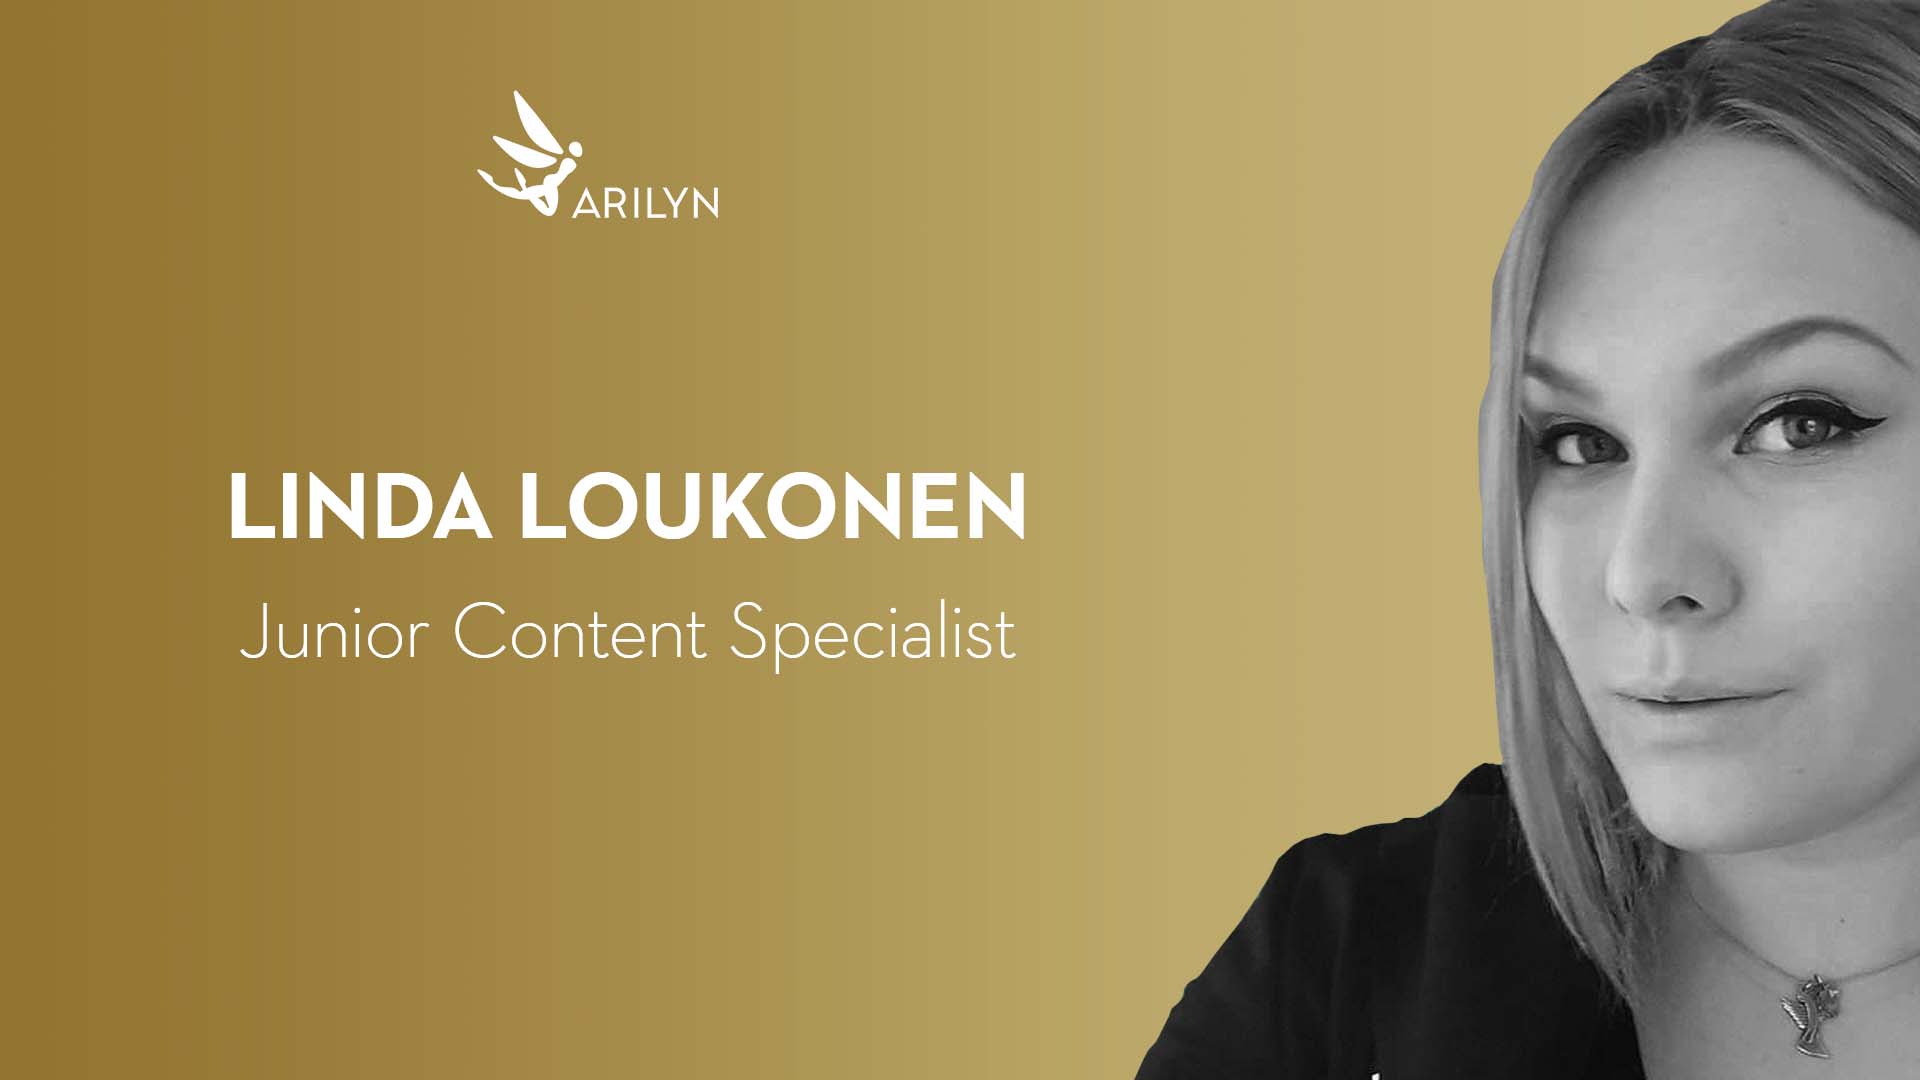 Get to know Arilyn – Linda, Junior Content Specialist